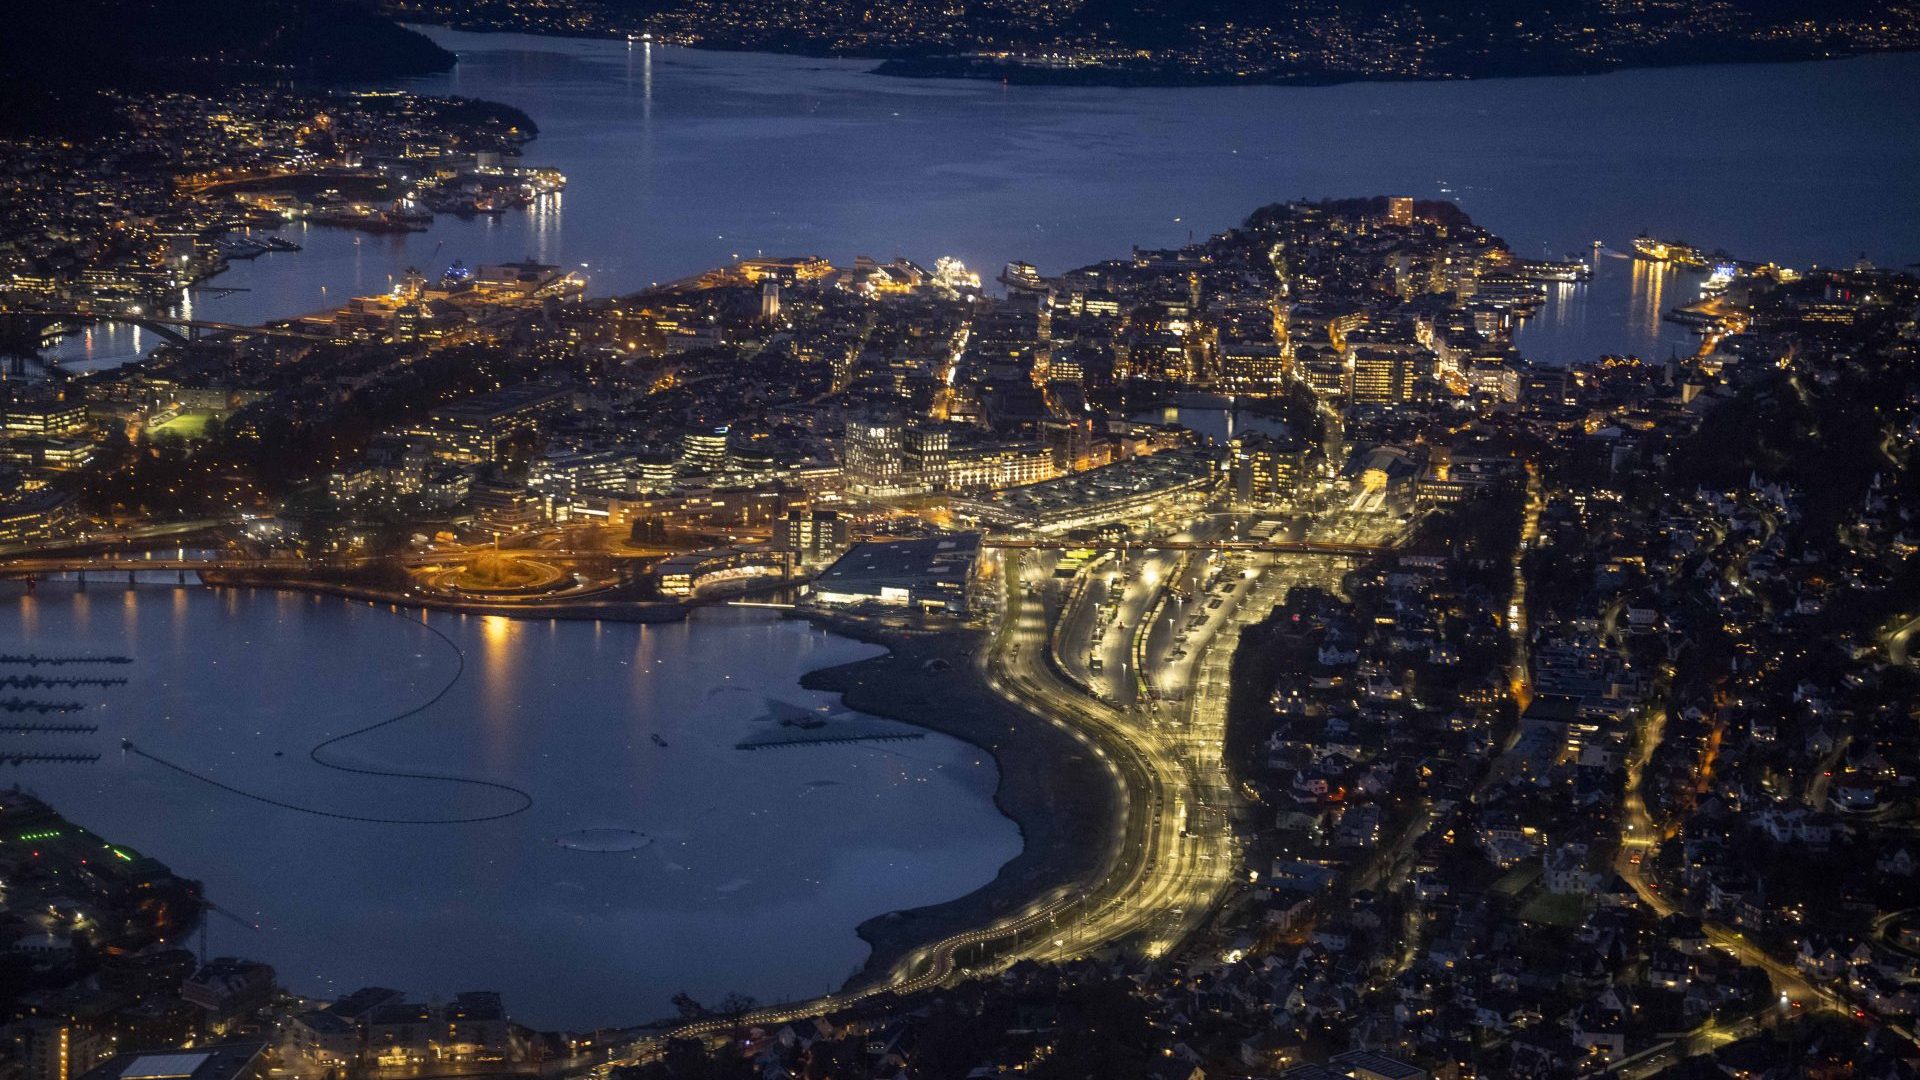 The city of Bergen is becoming one of Europe’s gastronomic capitals. Photo: Jorge Mantilla/NurPhoto/Getty